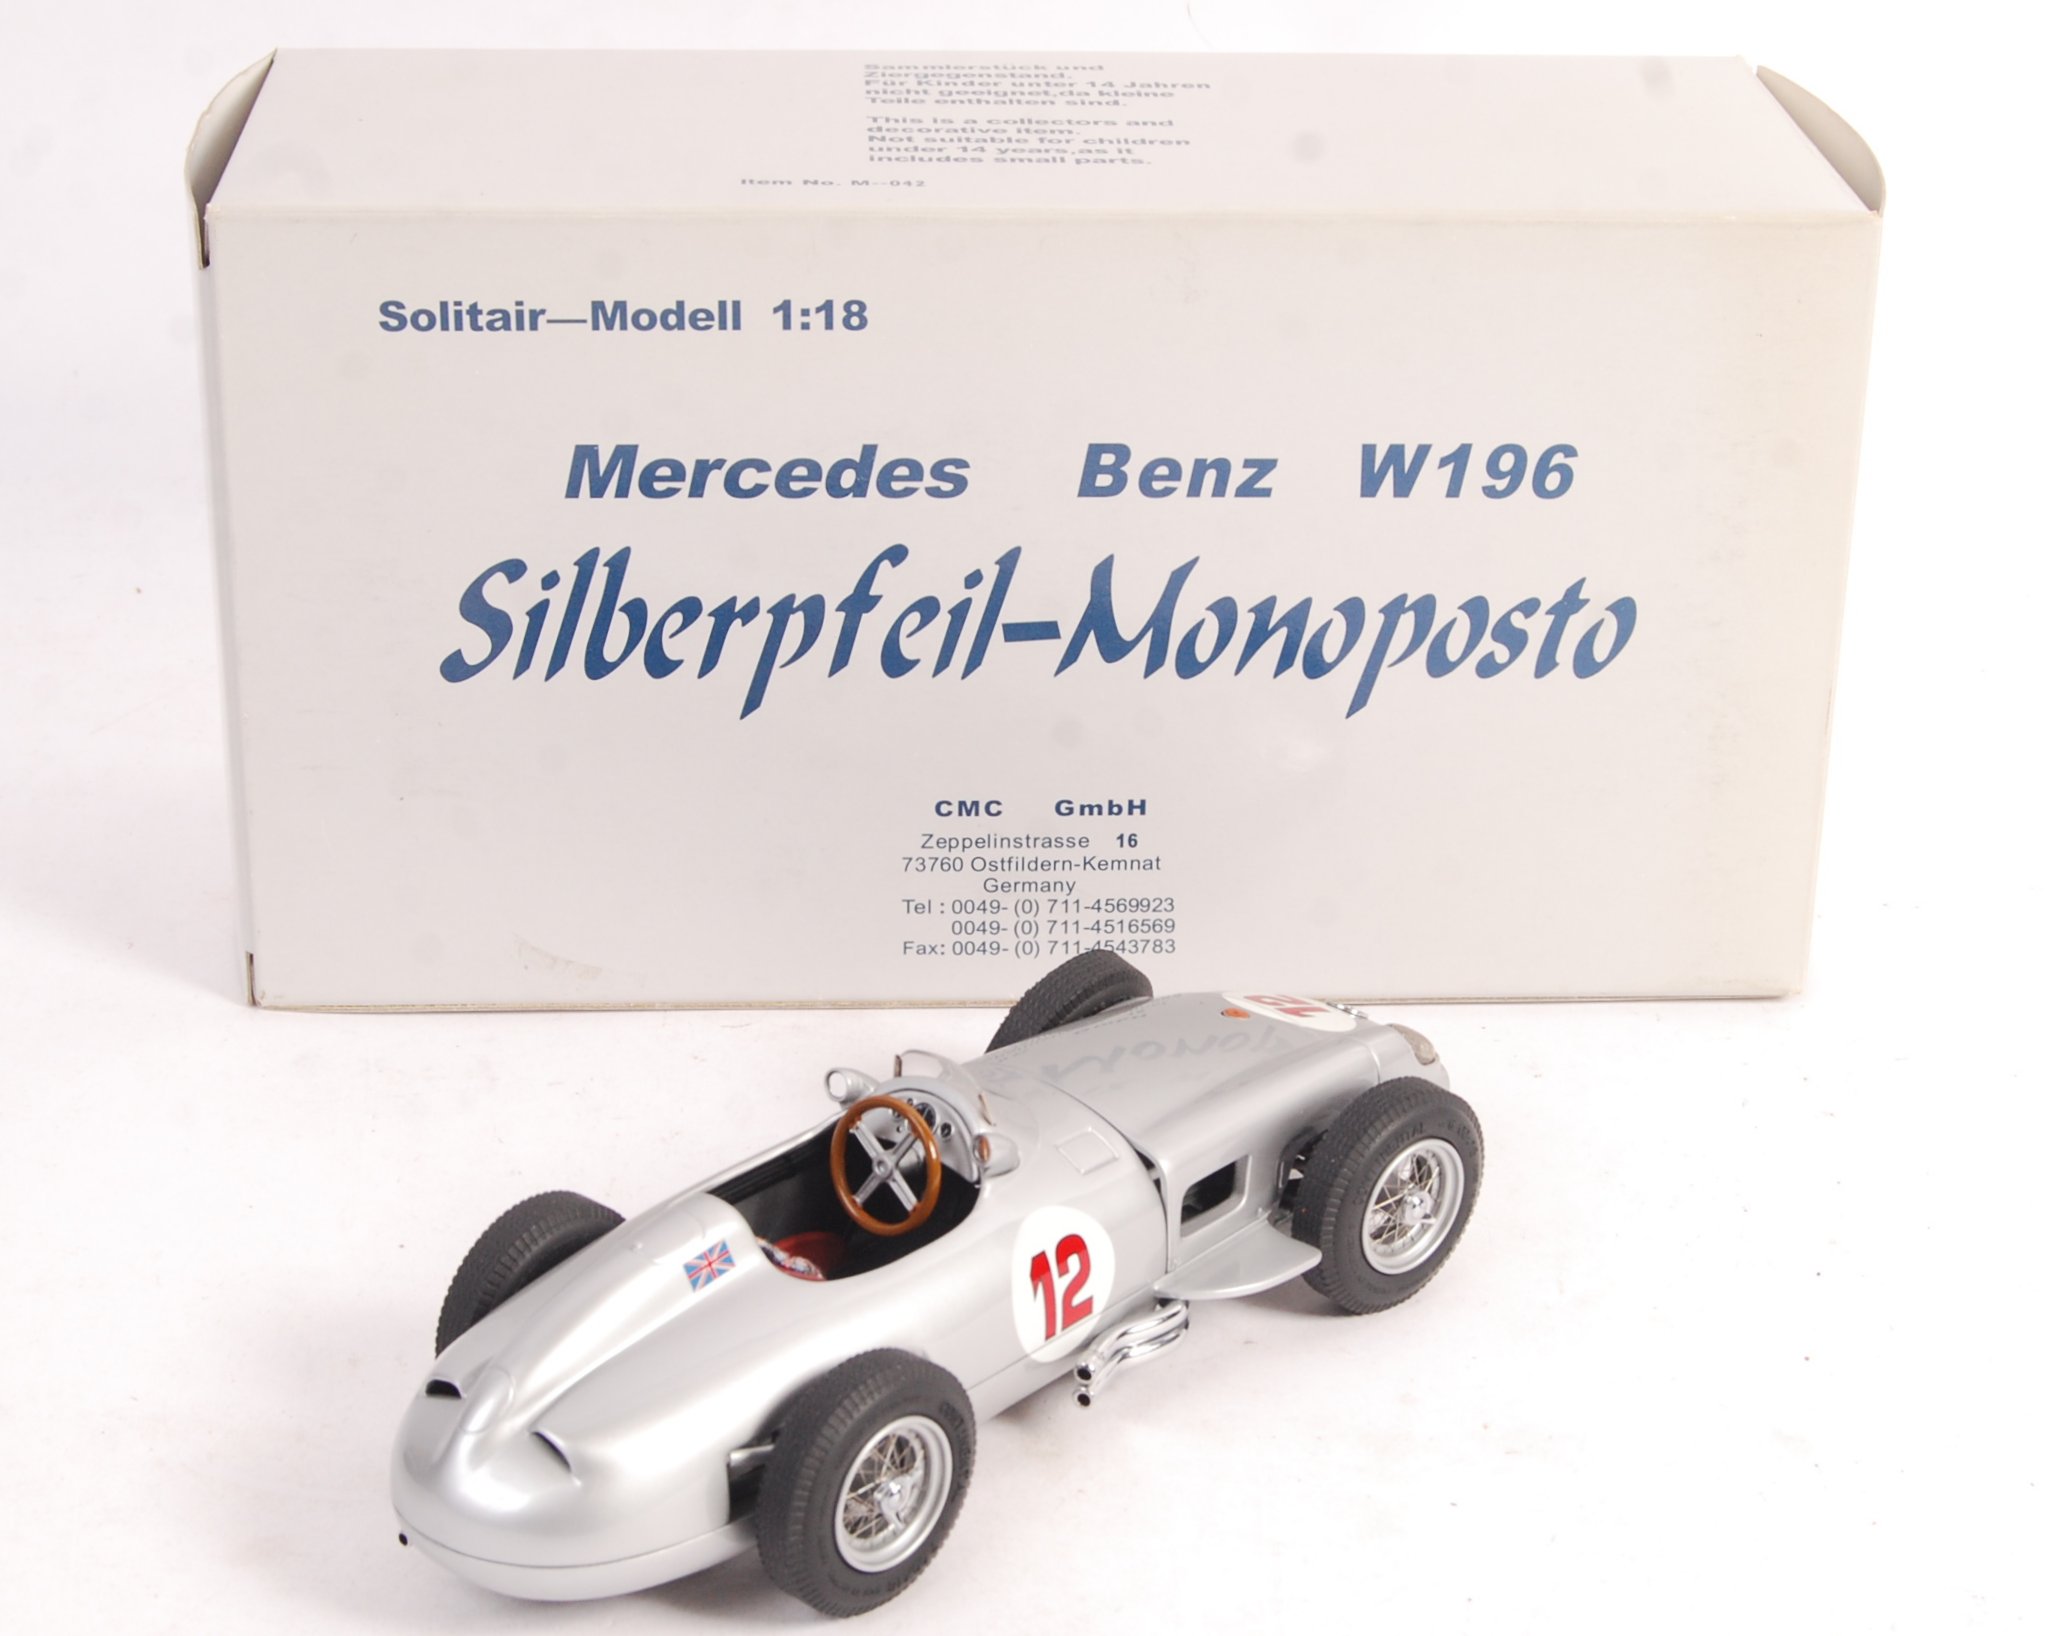 CMC 1/18 SCALE MERCEDES BENZ W196 #12 RACING CAR - Image 2 of 6